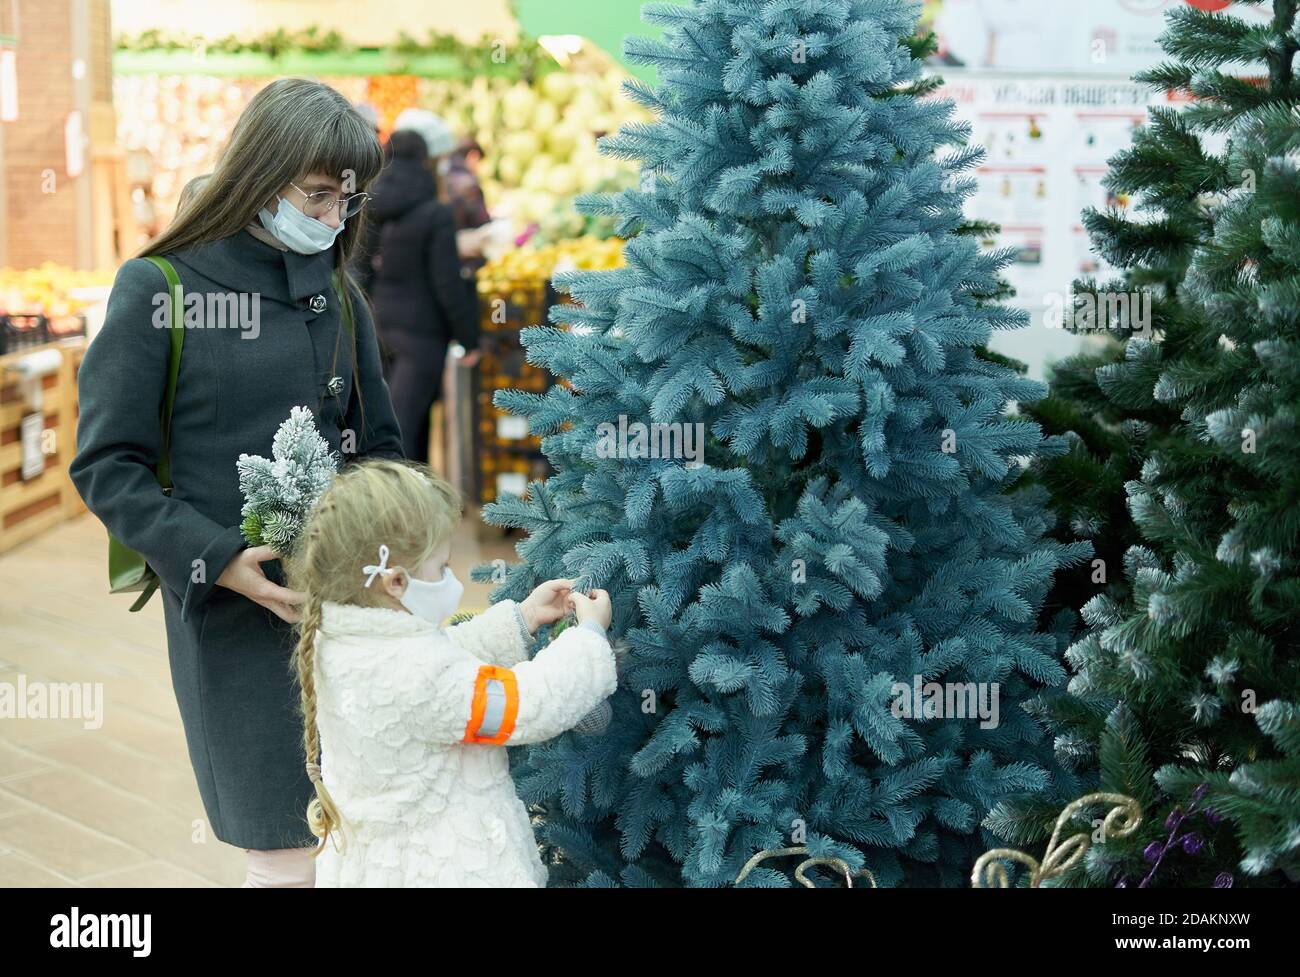 Young mother with a child choose a PVC Christmas tree in a shopping center Stock Photo